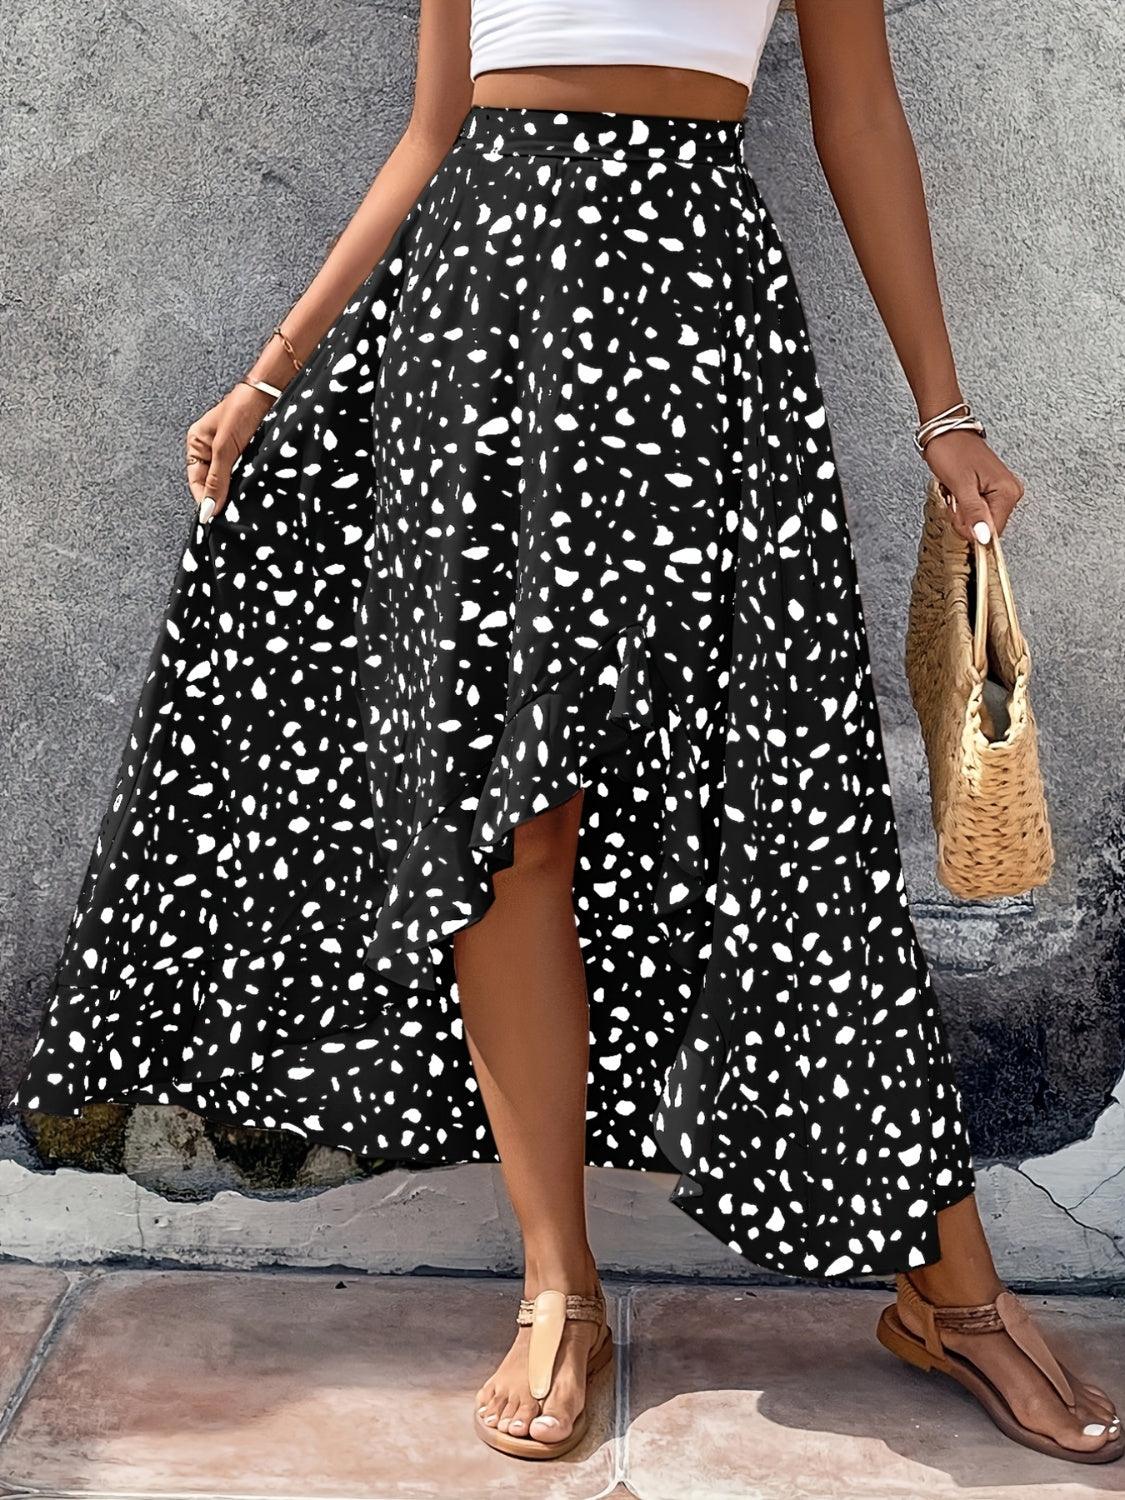 Get the High-Low Printed Skirt Look: A Fashion Must-Have